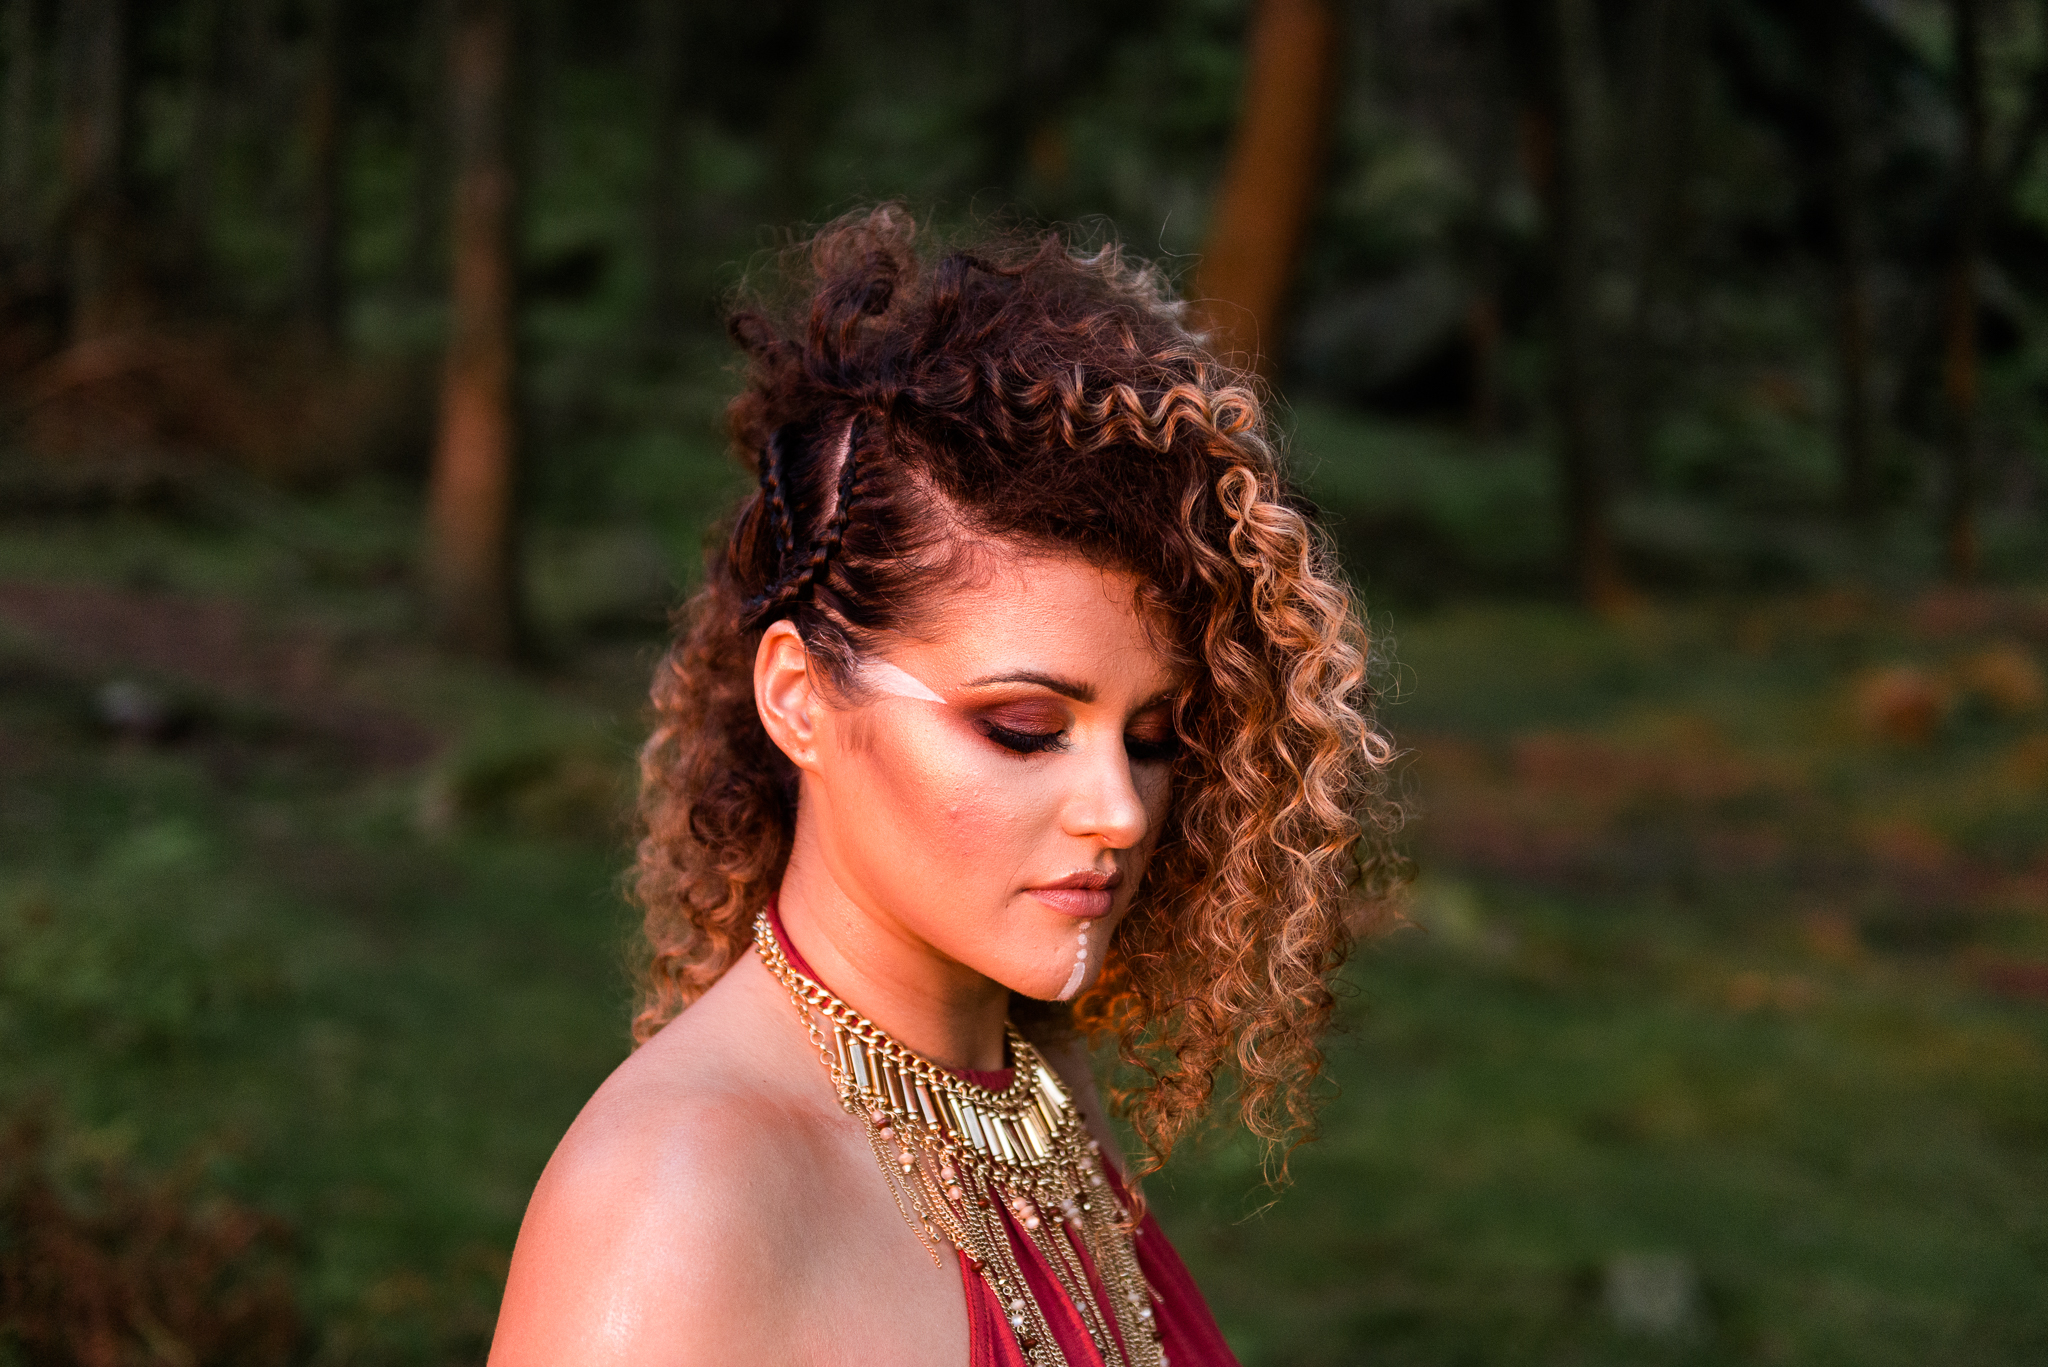 Styled Shoot Model Ethnic Earthy Tribal The Roaches Location Photographs - Jenny Harper Photography-9.jpg